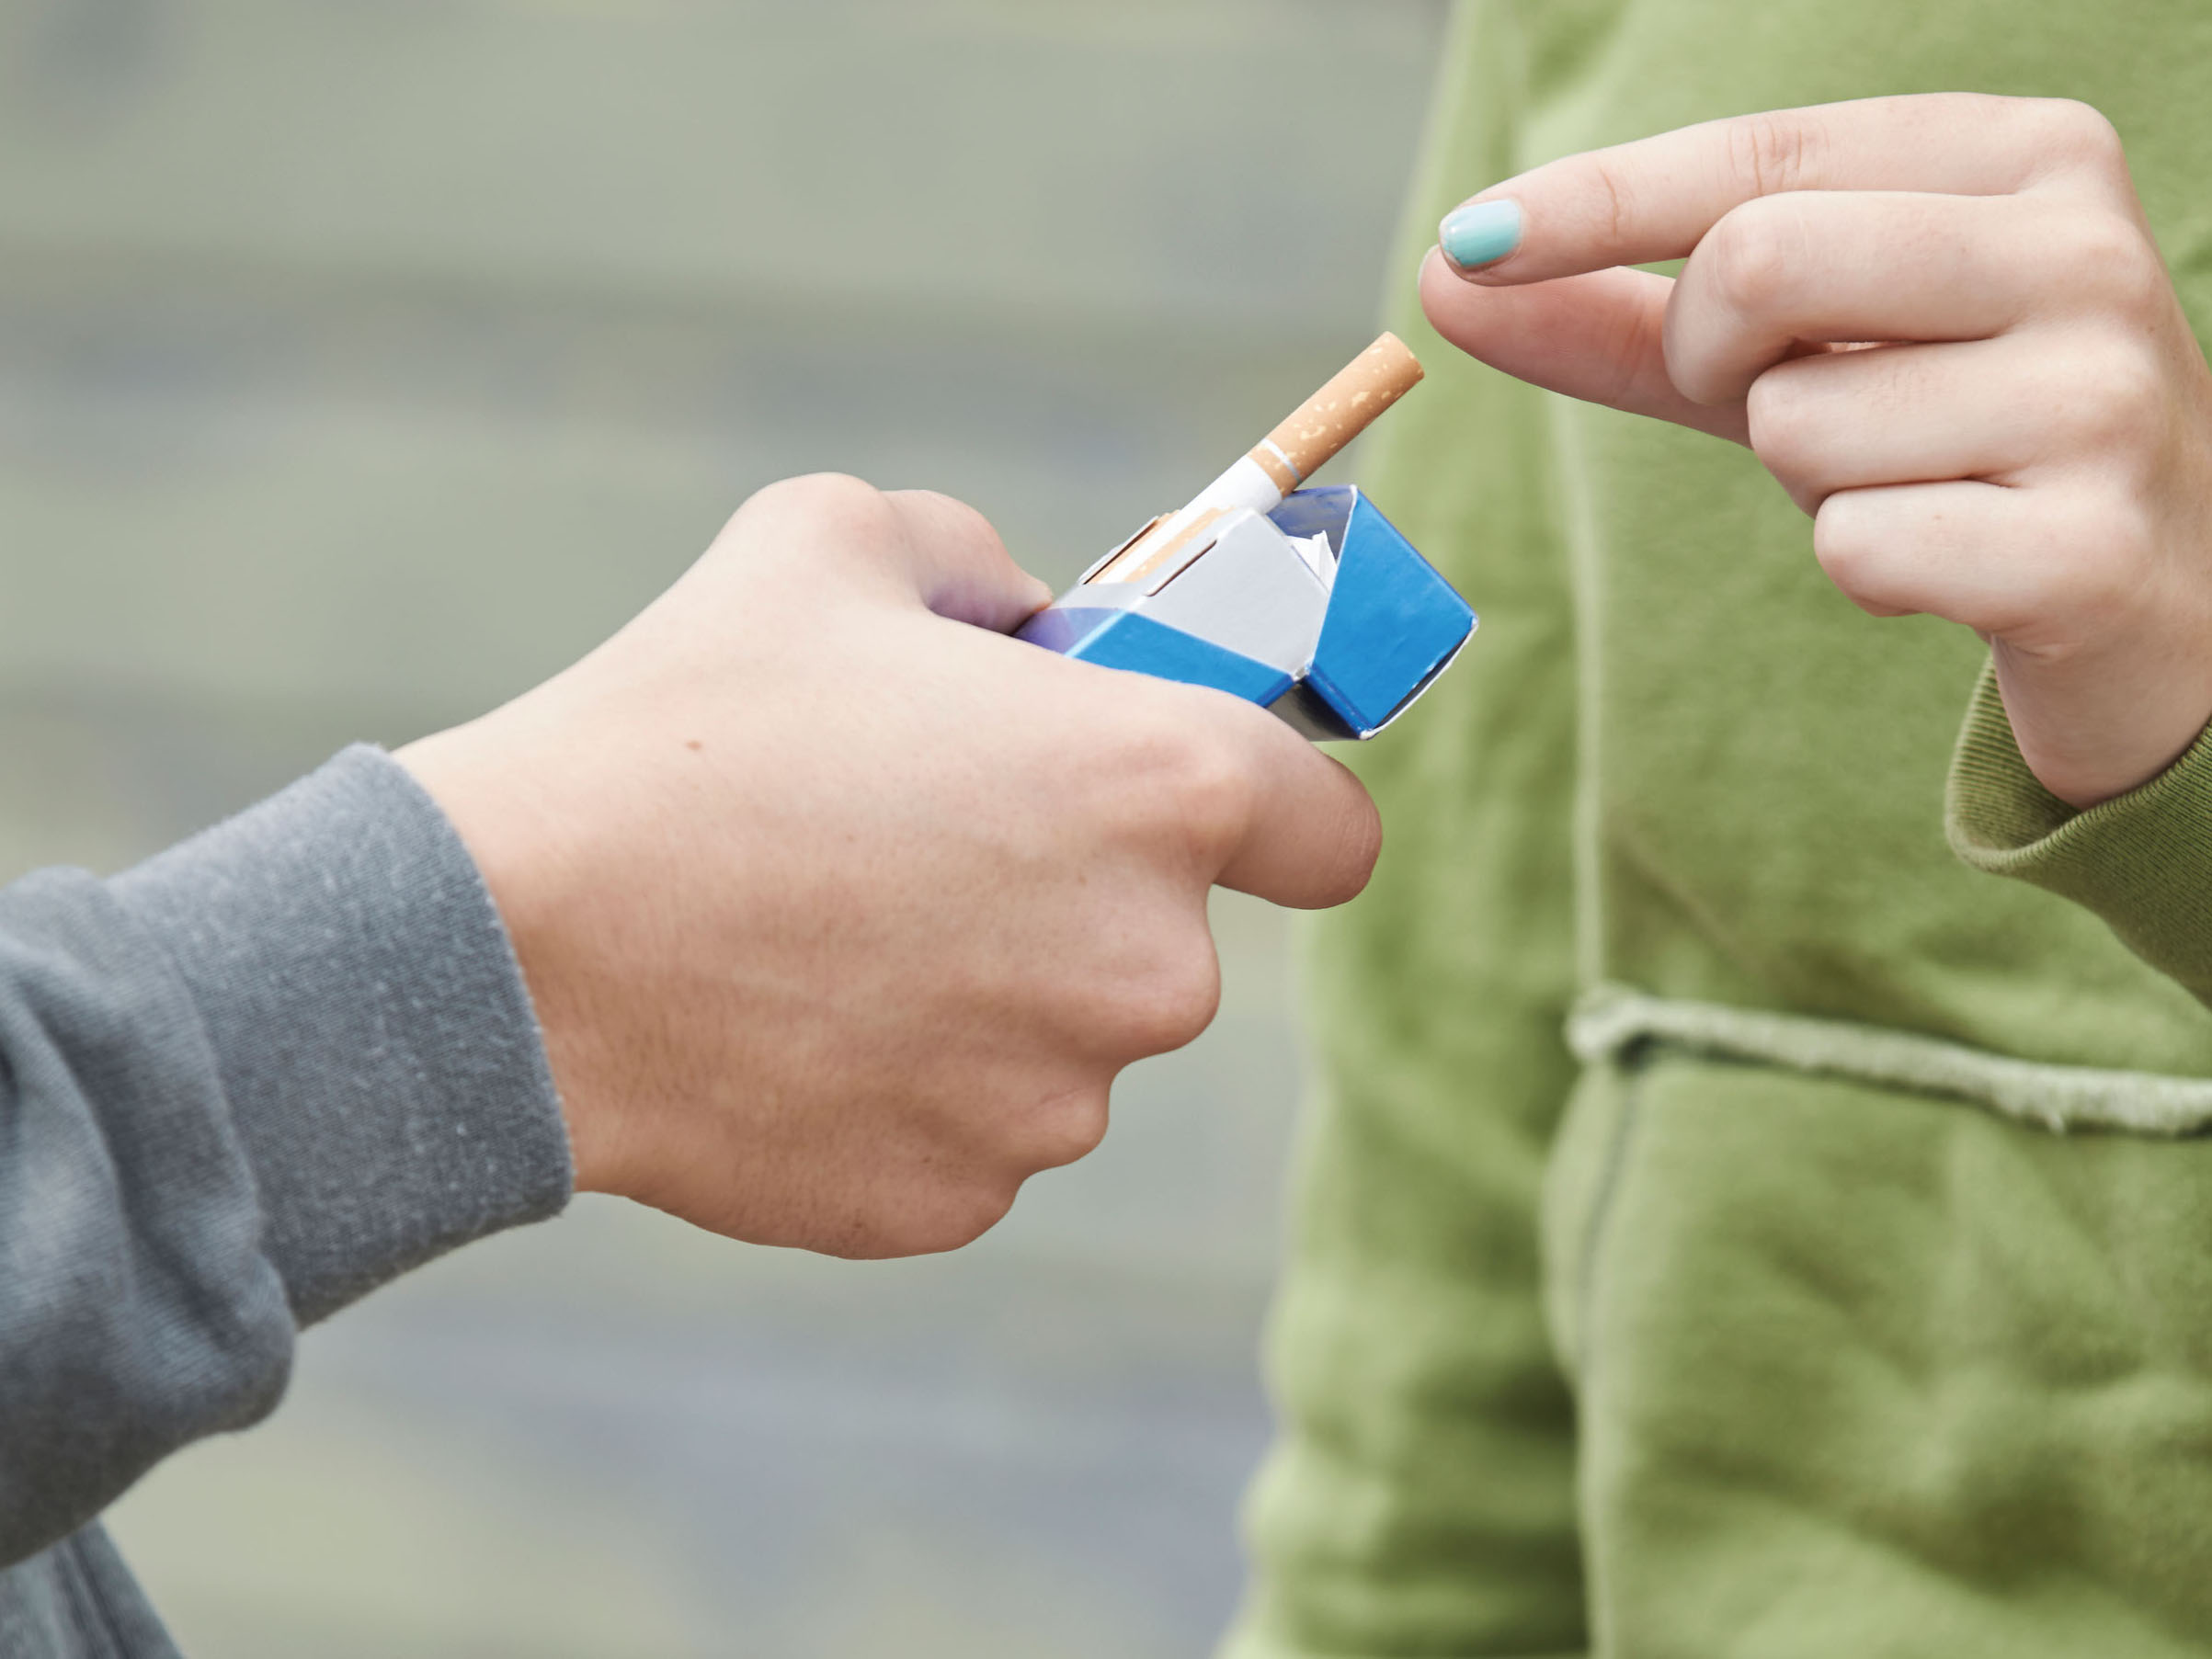 person's hand offering a cigarette to another person